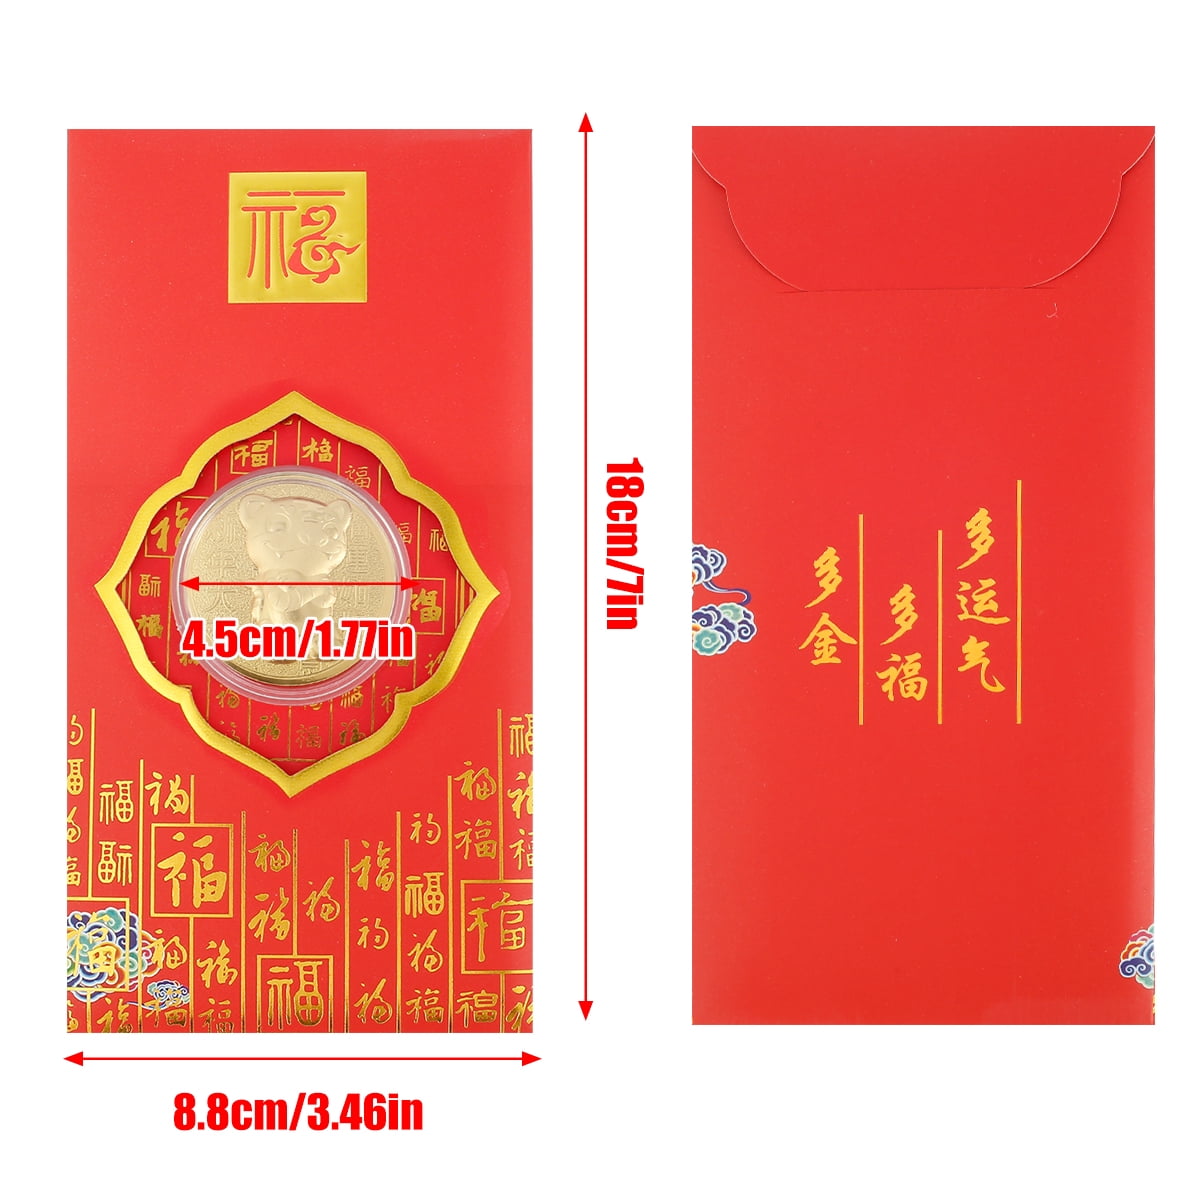 Juvale 100-Pack Red Money Envelopes for Lunar New Year, Red Pockets (3.5 x  6.7 In)